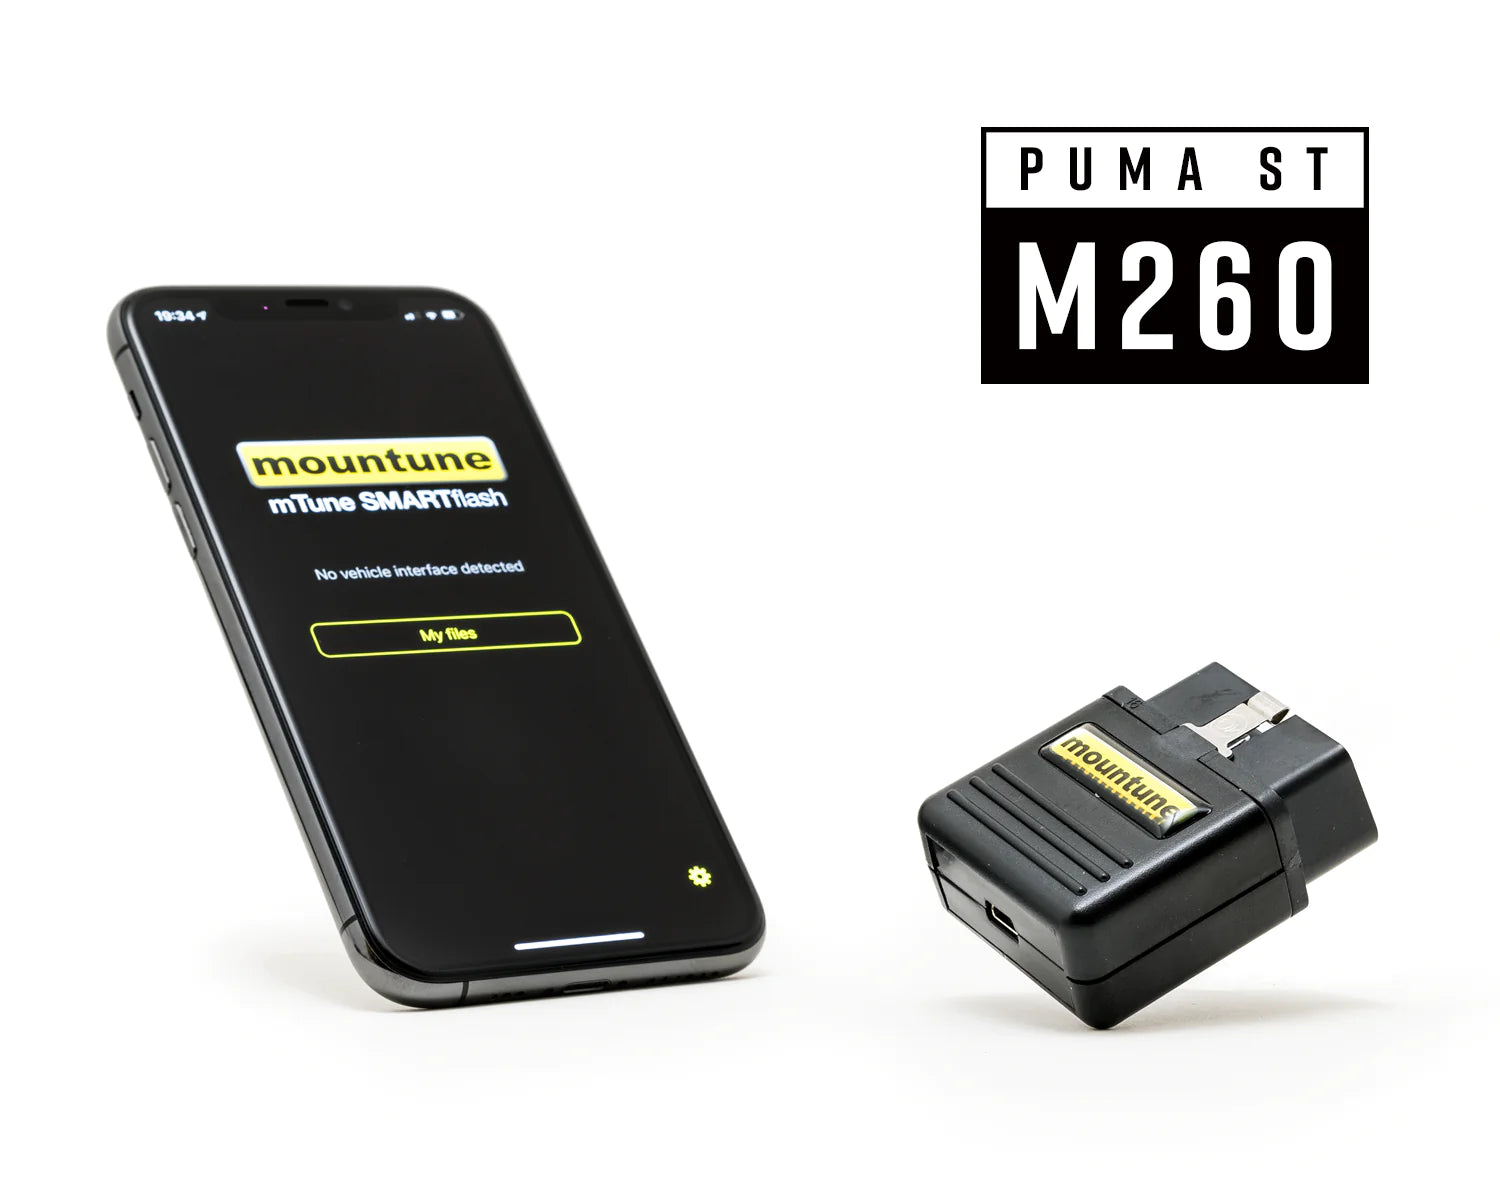 MTune SMARTflash M260 Upgrade [Puma ST] Fully Fitted, 45% OFF